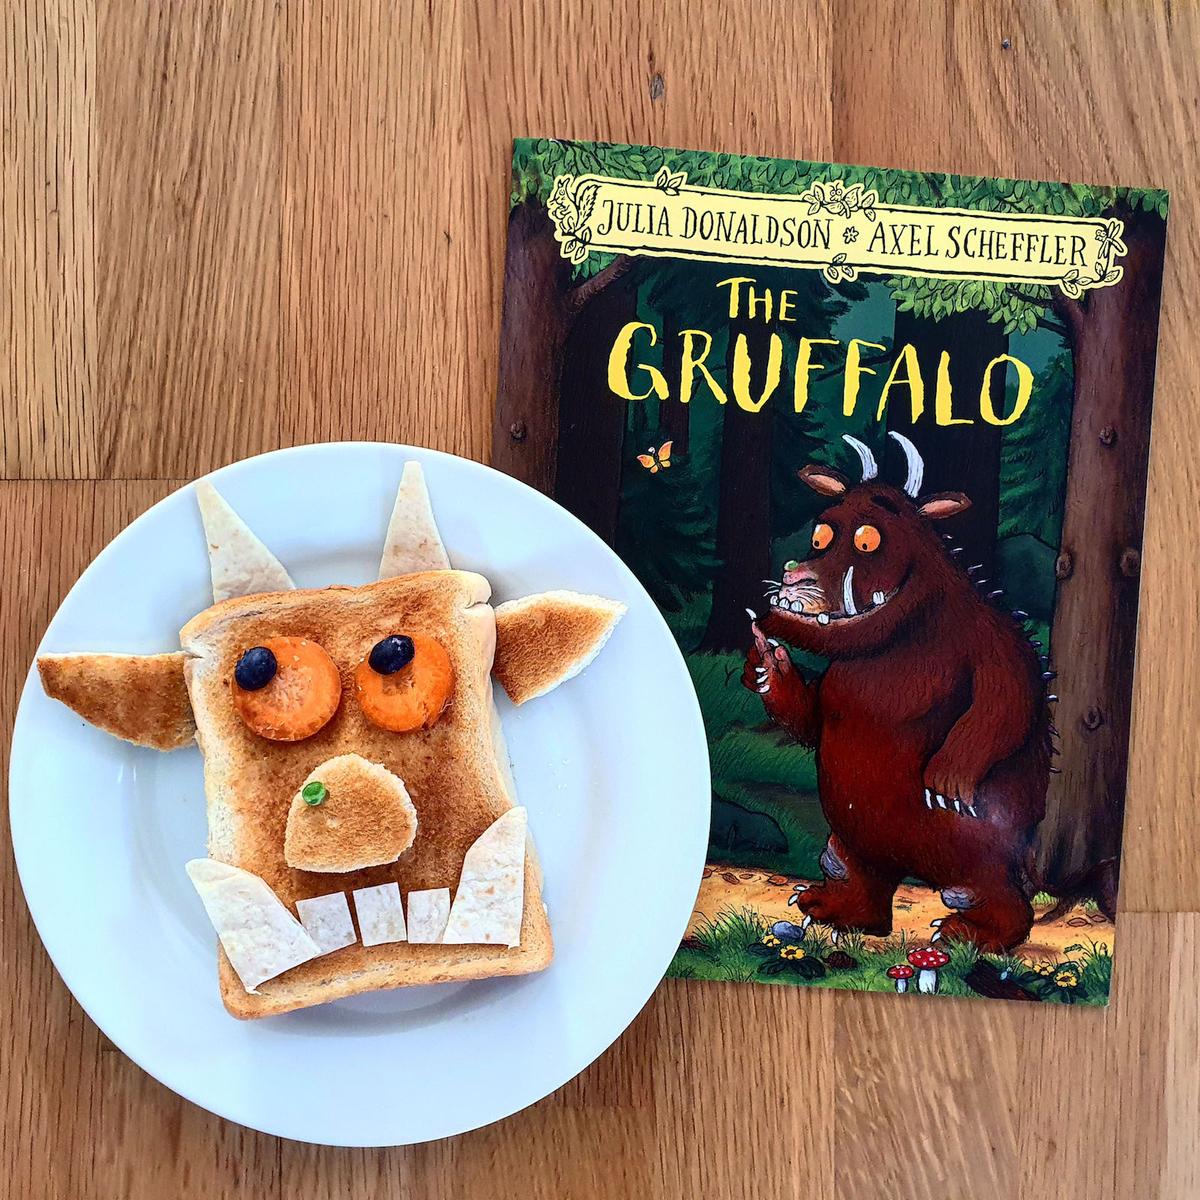 The Gruffalo. (Caters News)